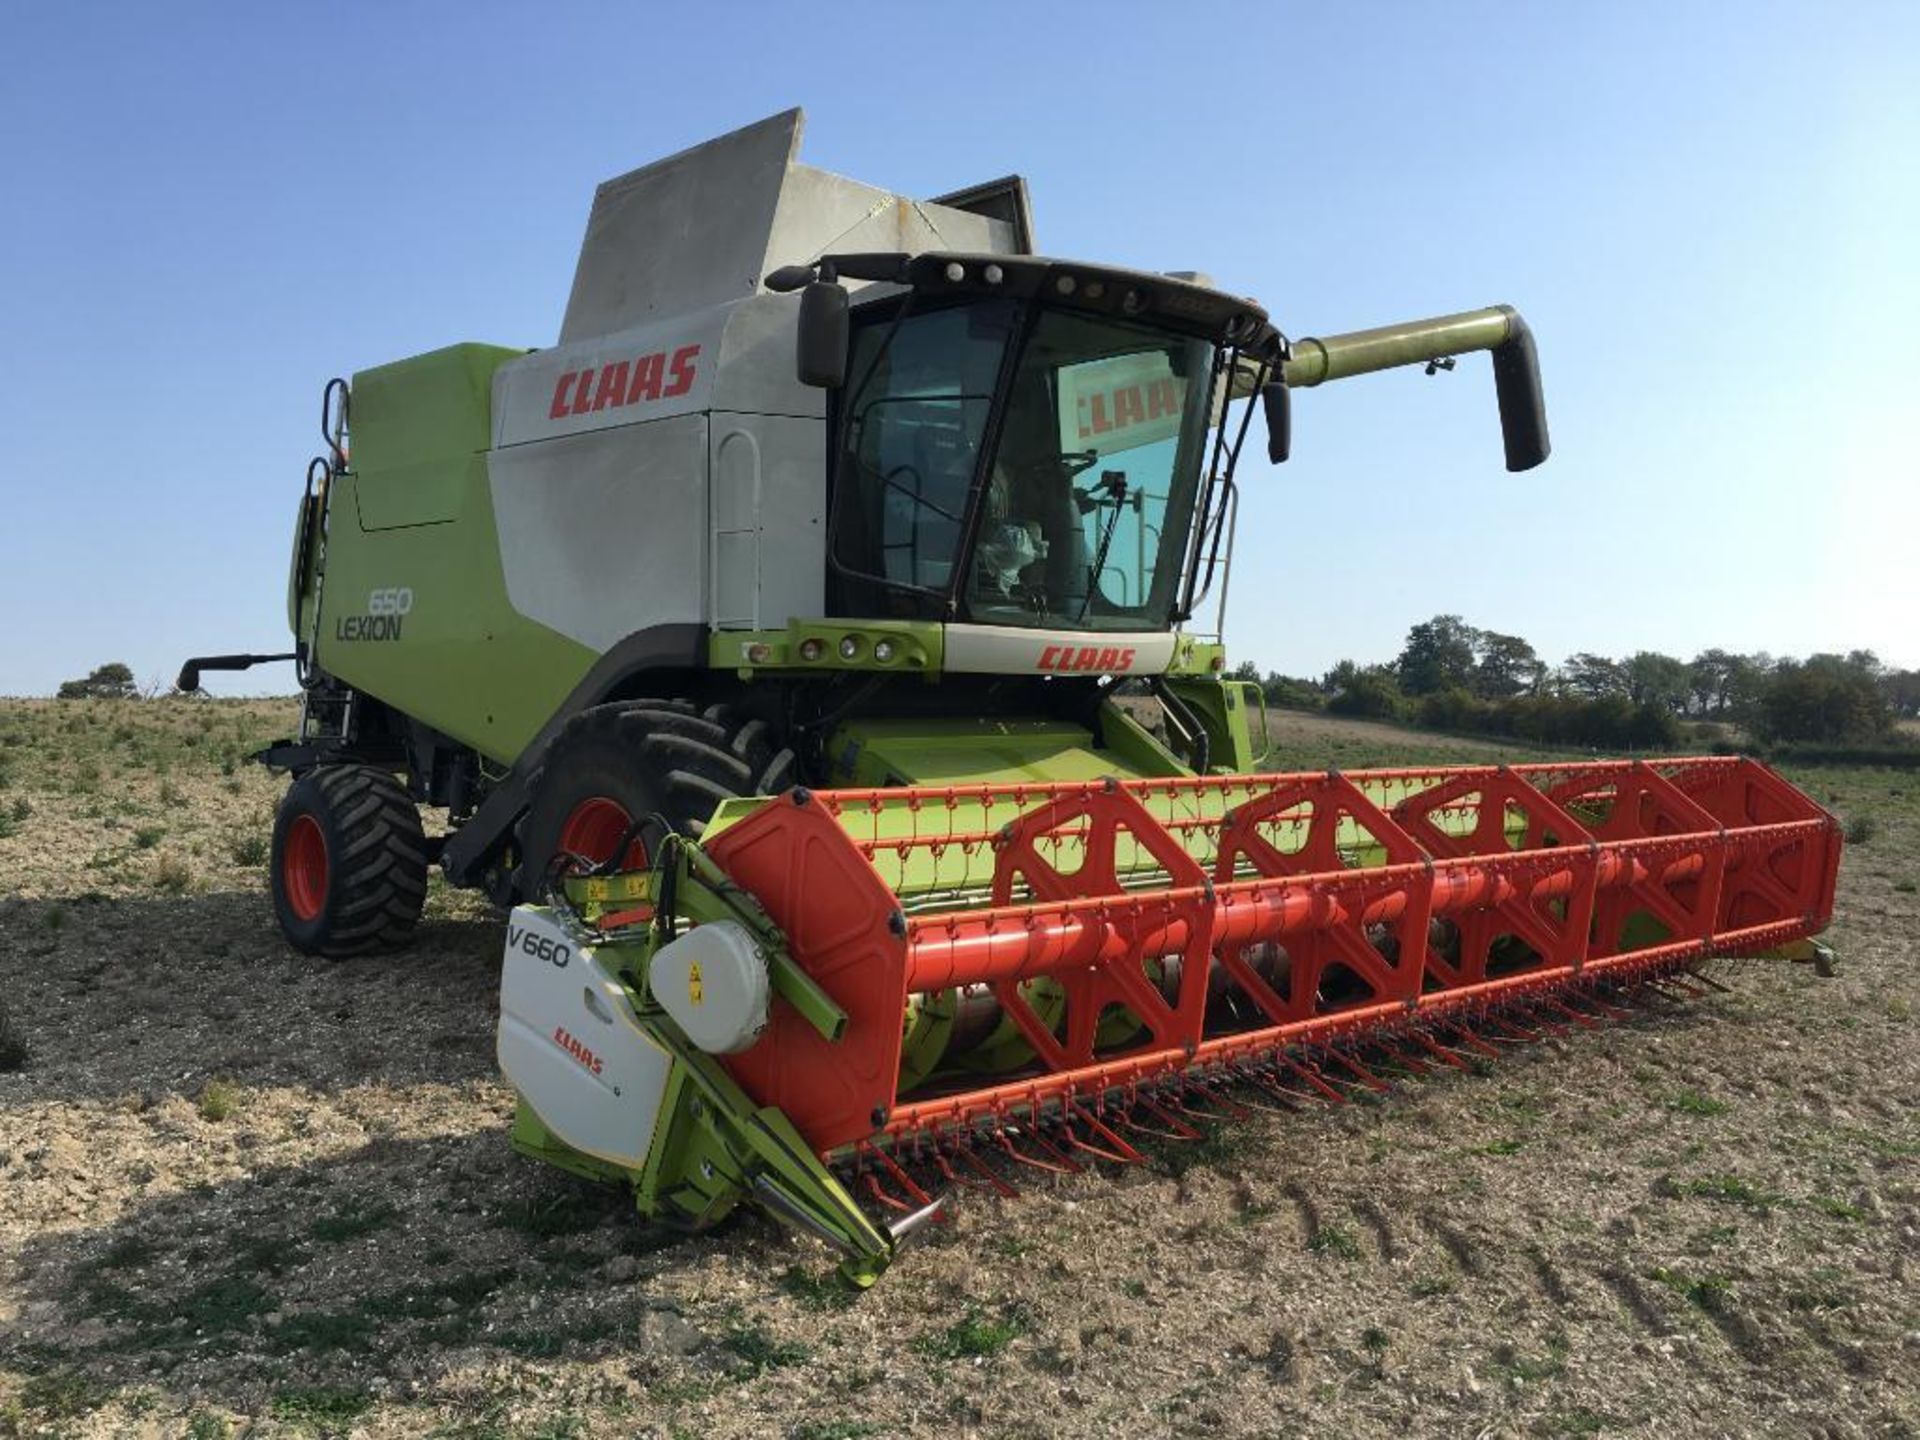 2014 Claas Lexion 650 combine harvester with V660 (22ft) header and header trolley with side knife a - Image 20 of 26